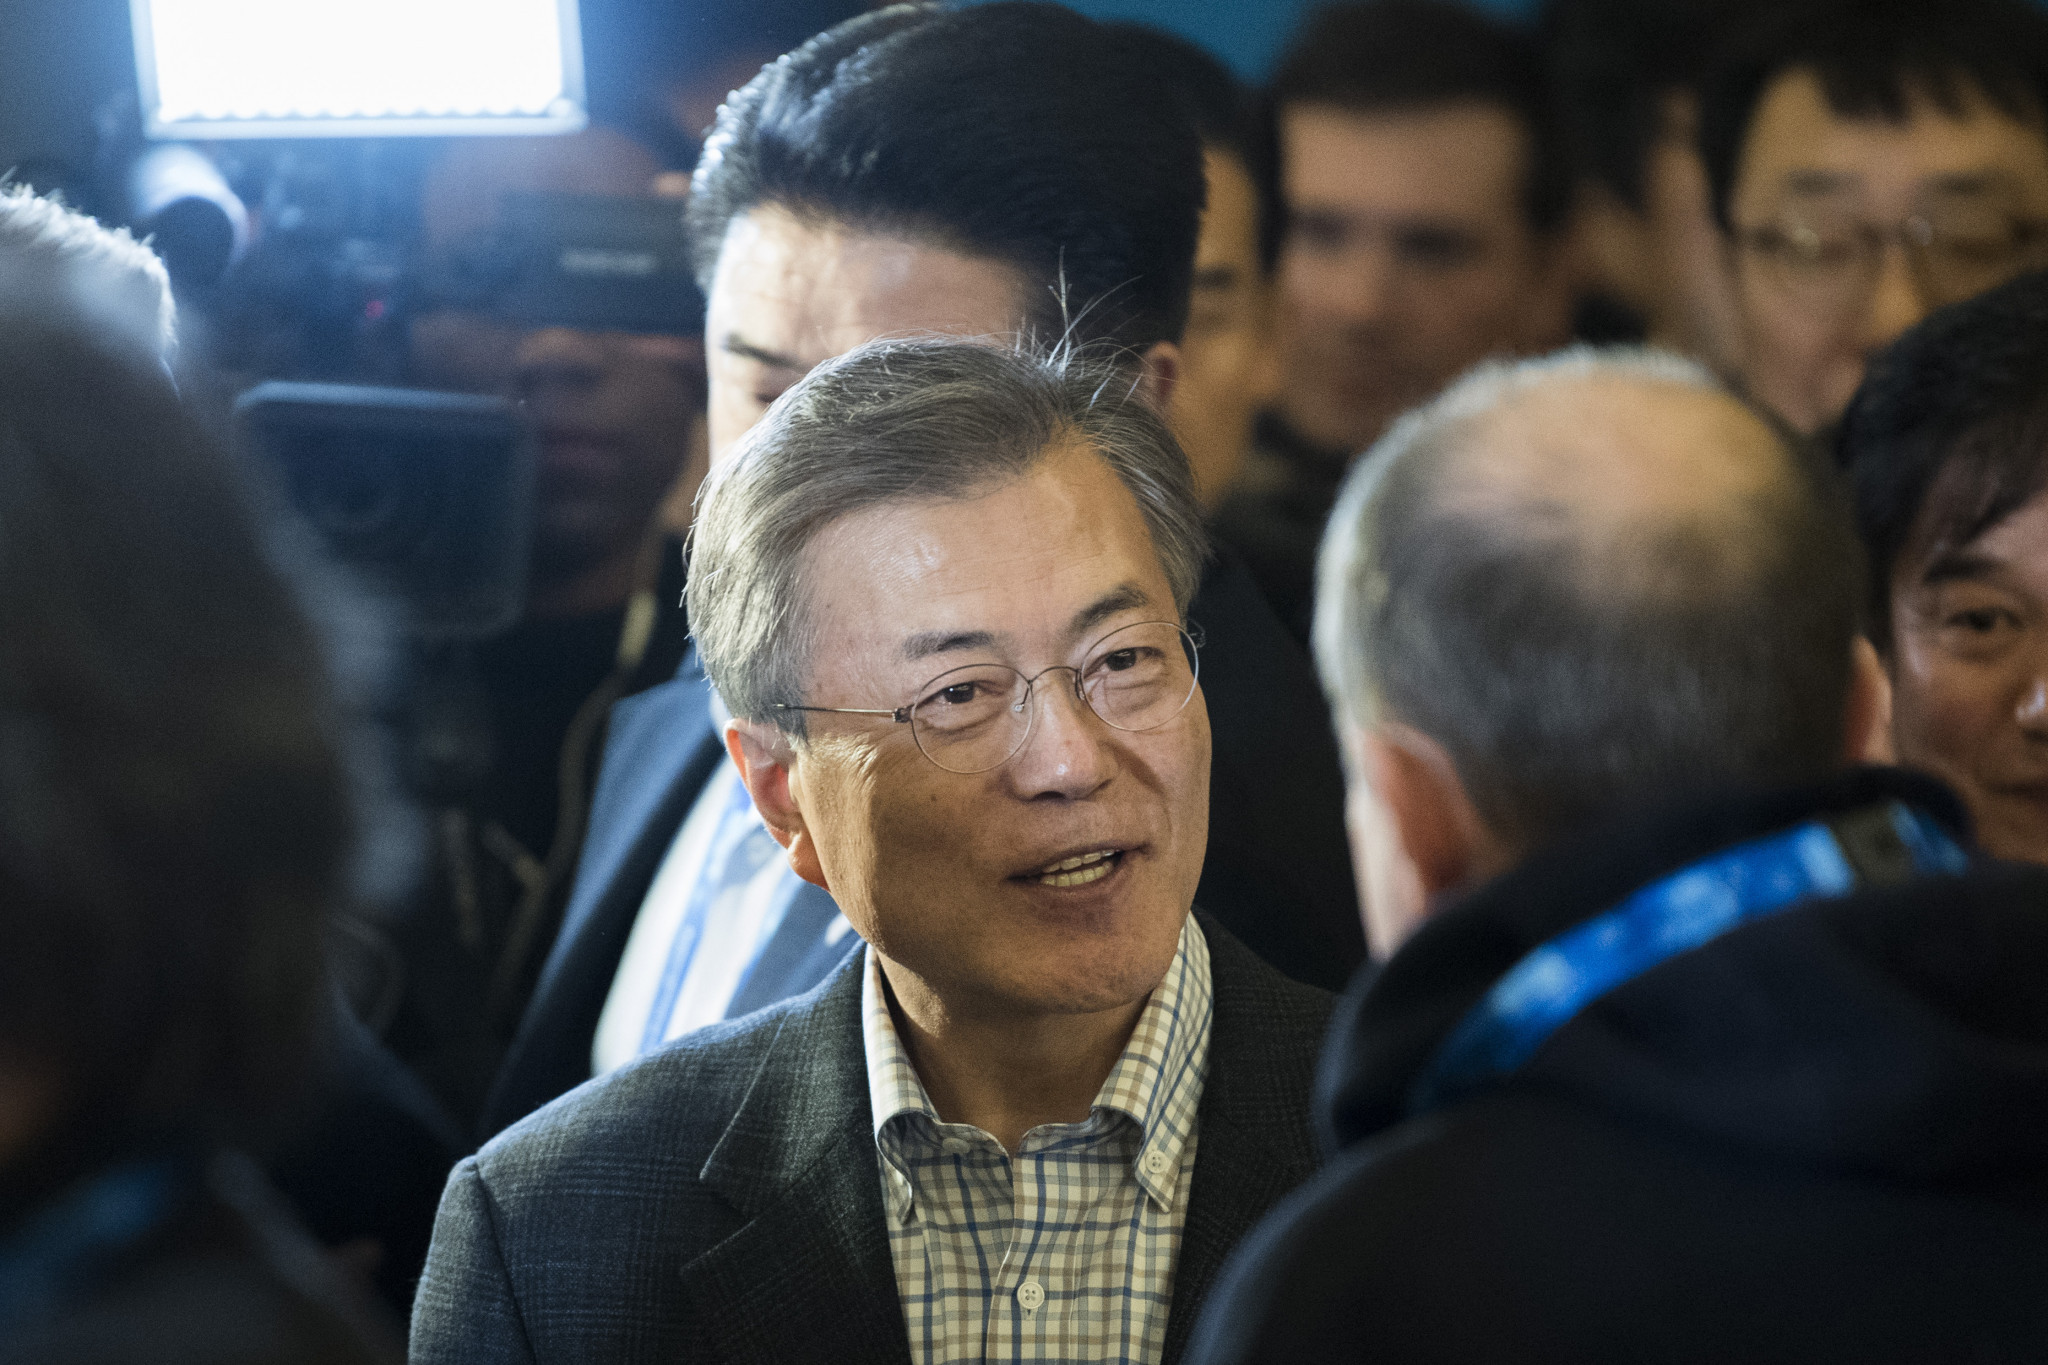 Moon Jae-in praised the participation of the OAR team at Pyeongchang 2018 ©Getty Images